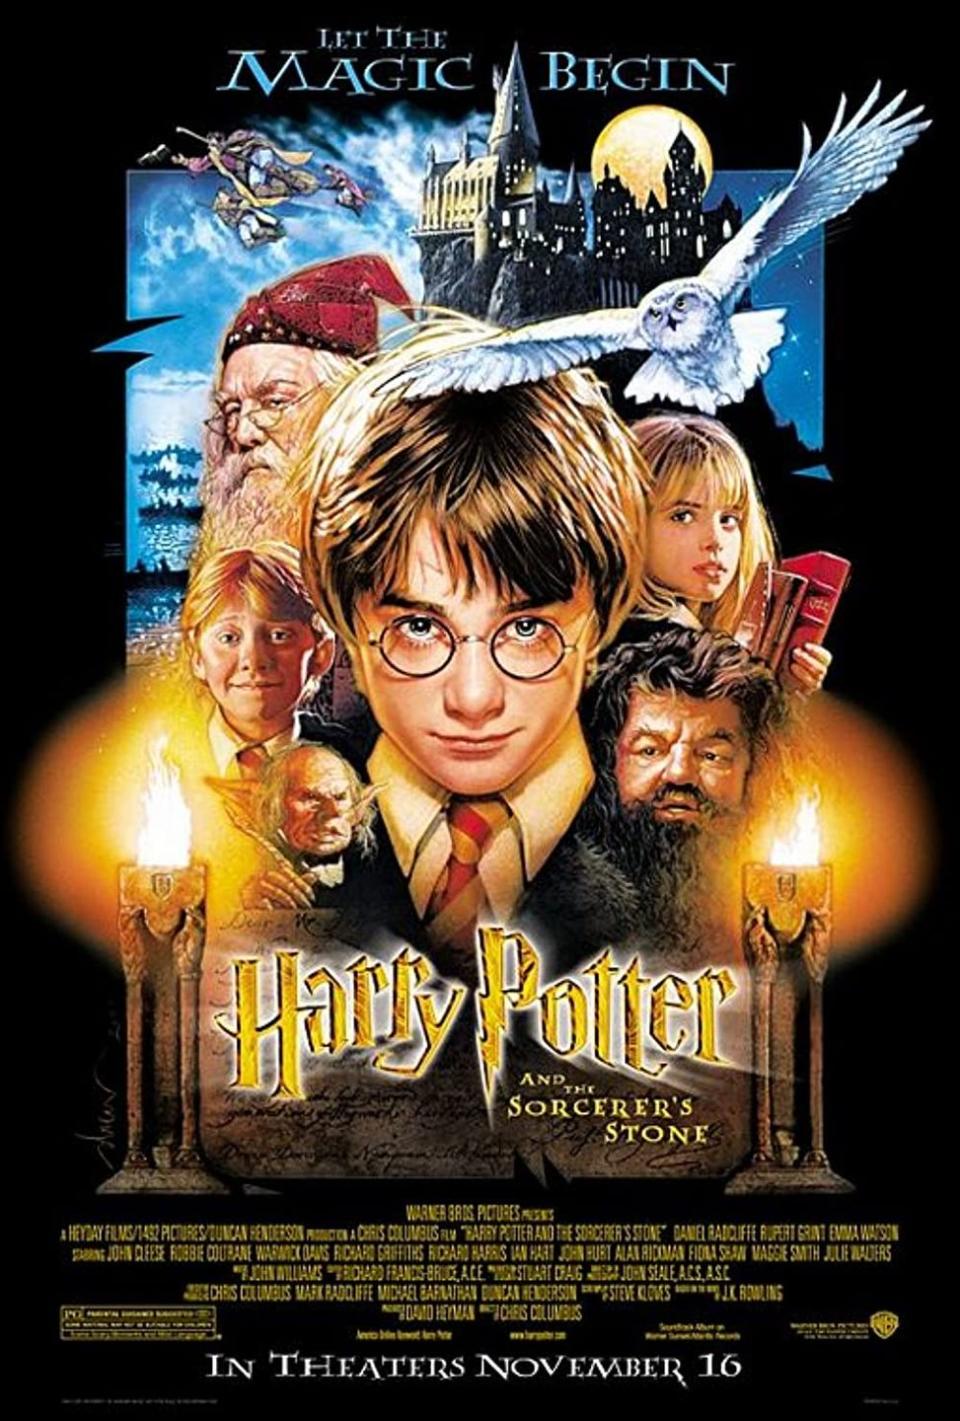 'Harry Potter and the Sorcerer’s Stone'